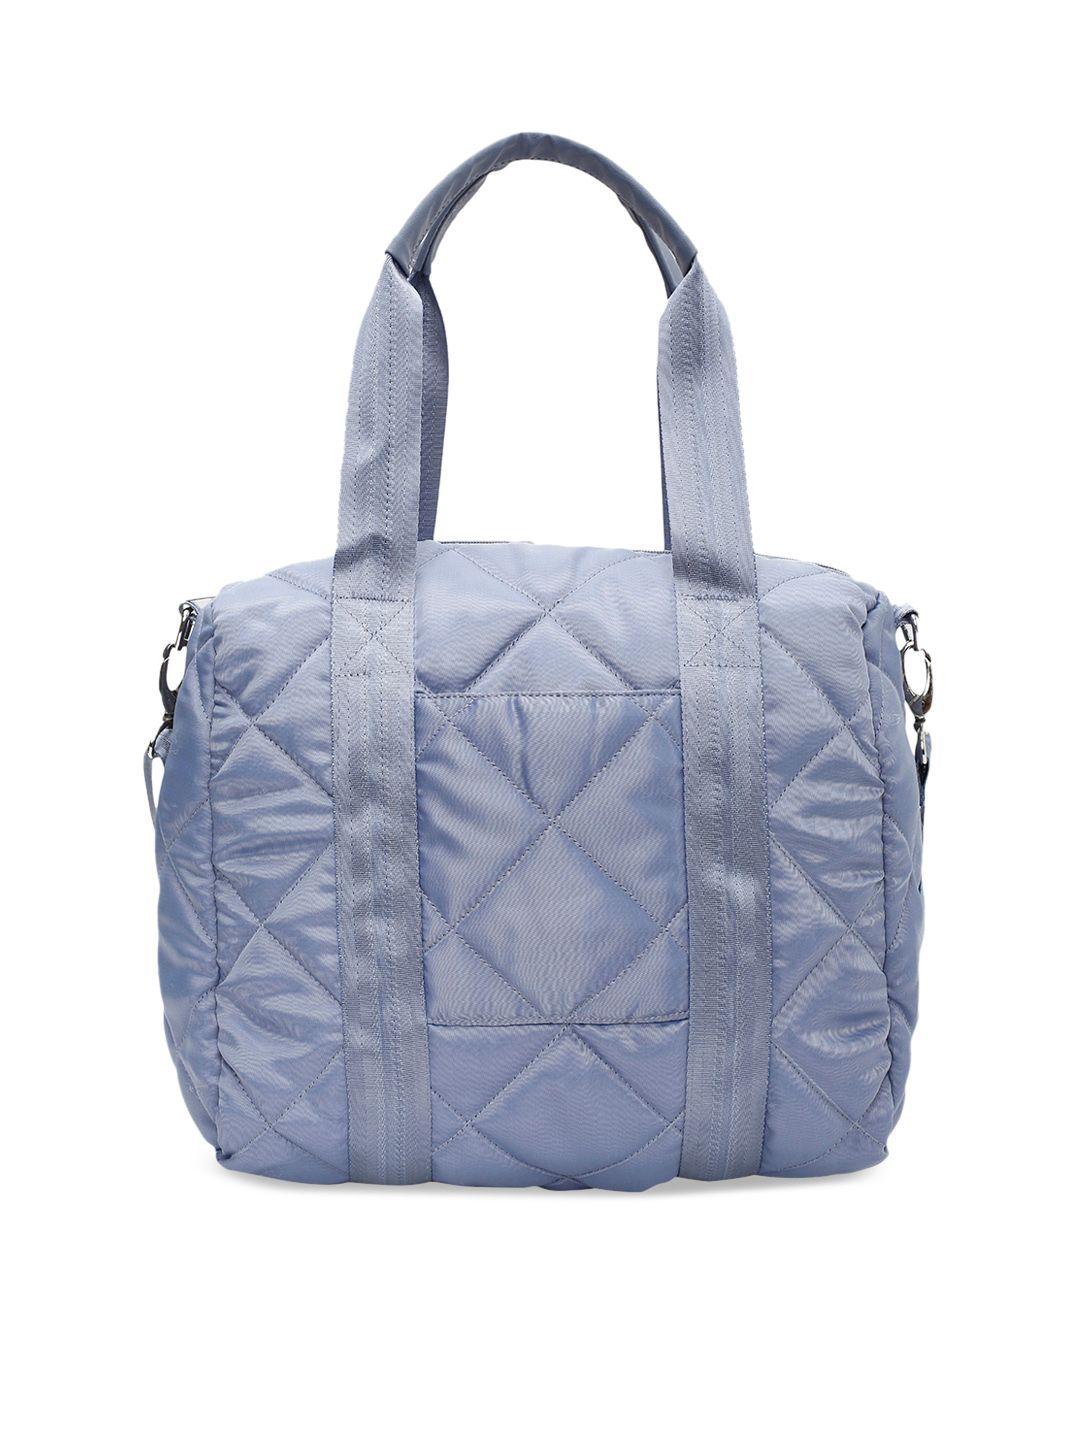 max blue oversized shopper handheld bag with quilted